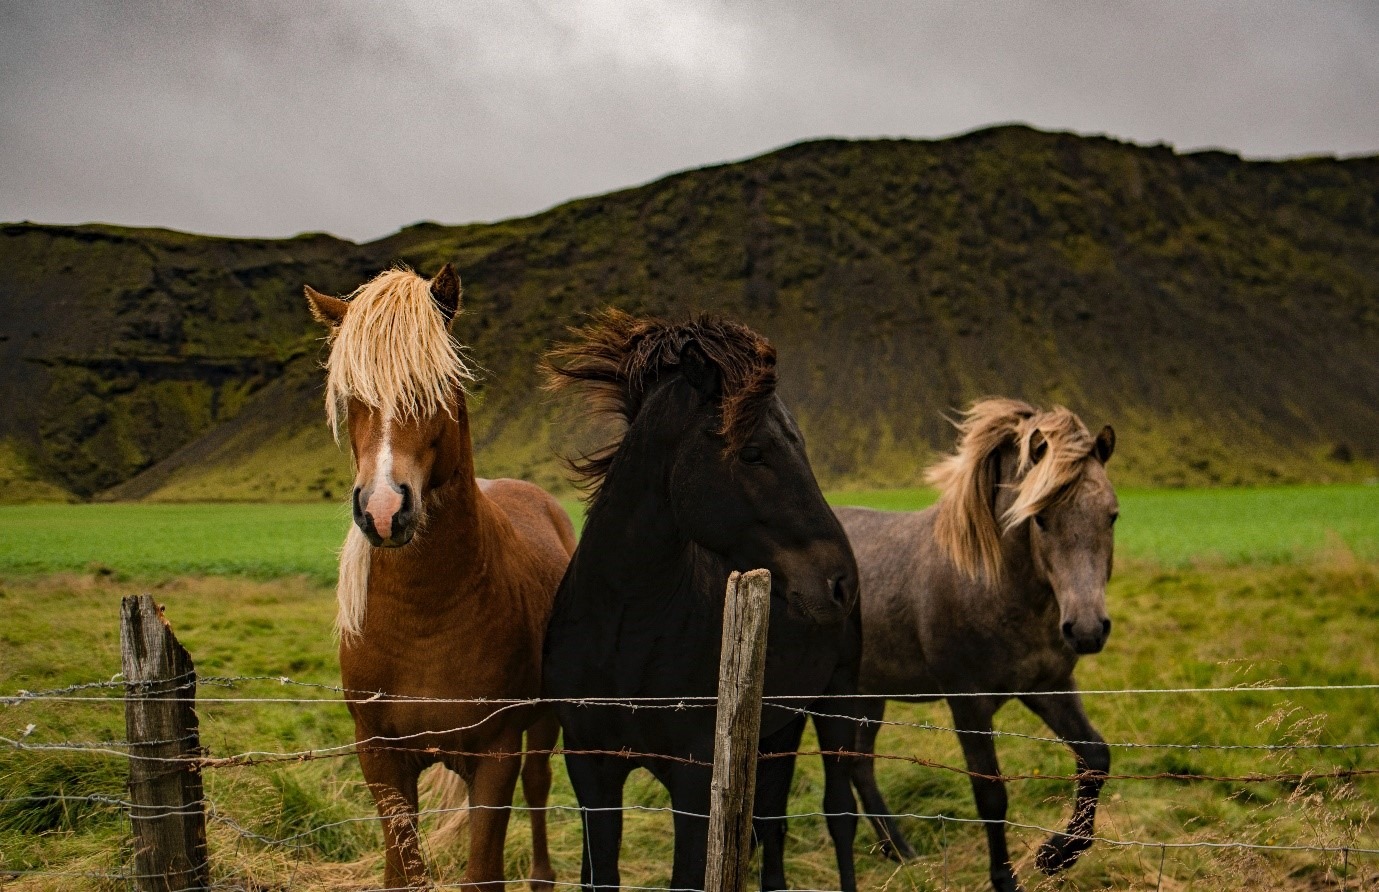 Horse Breeds: A guide to different horse breeds